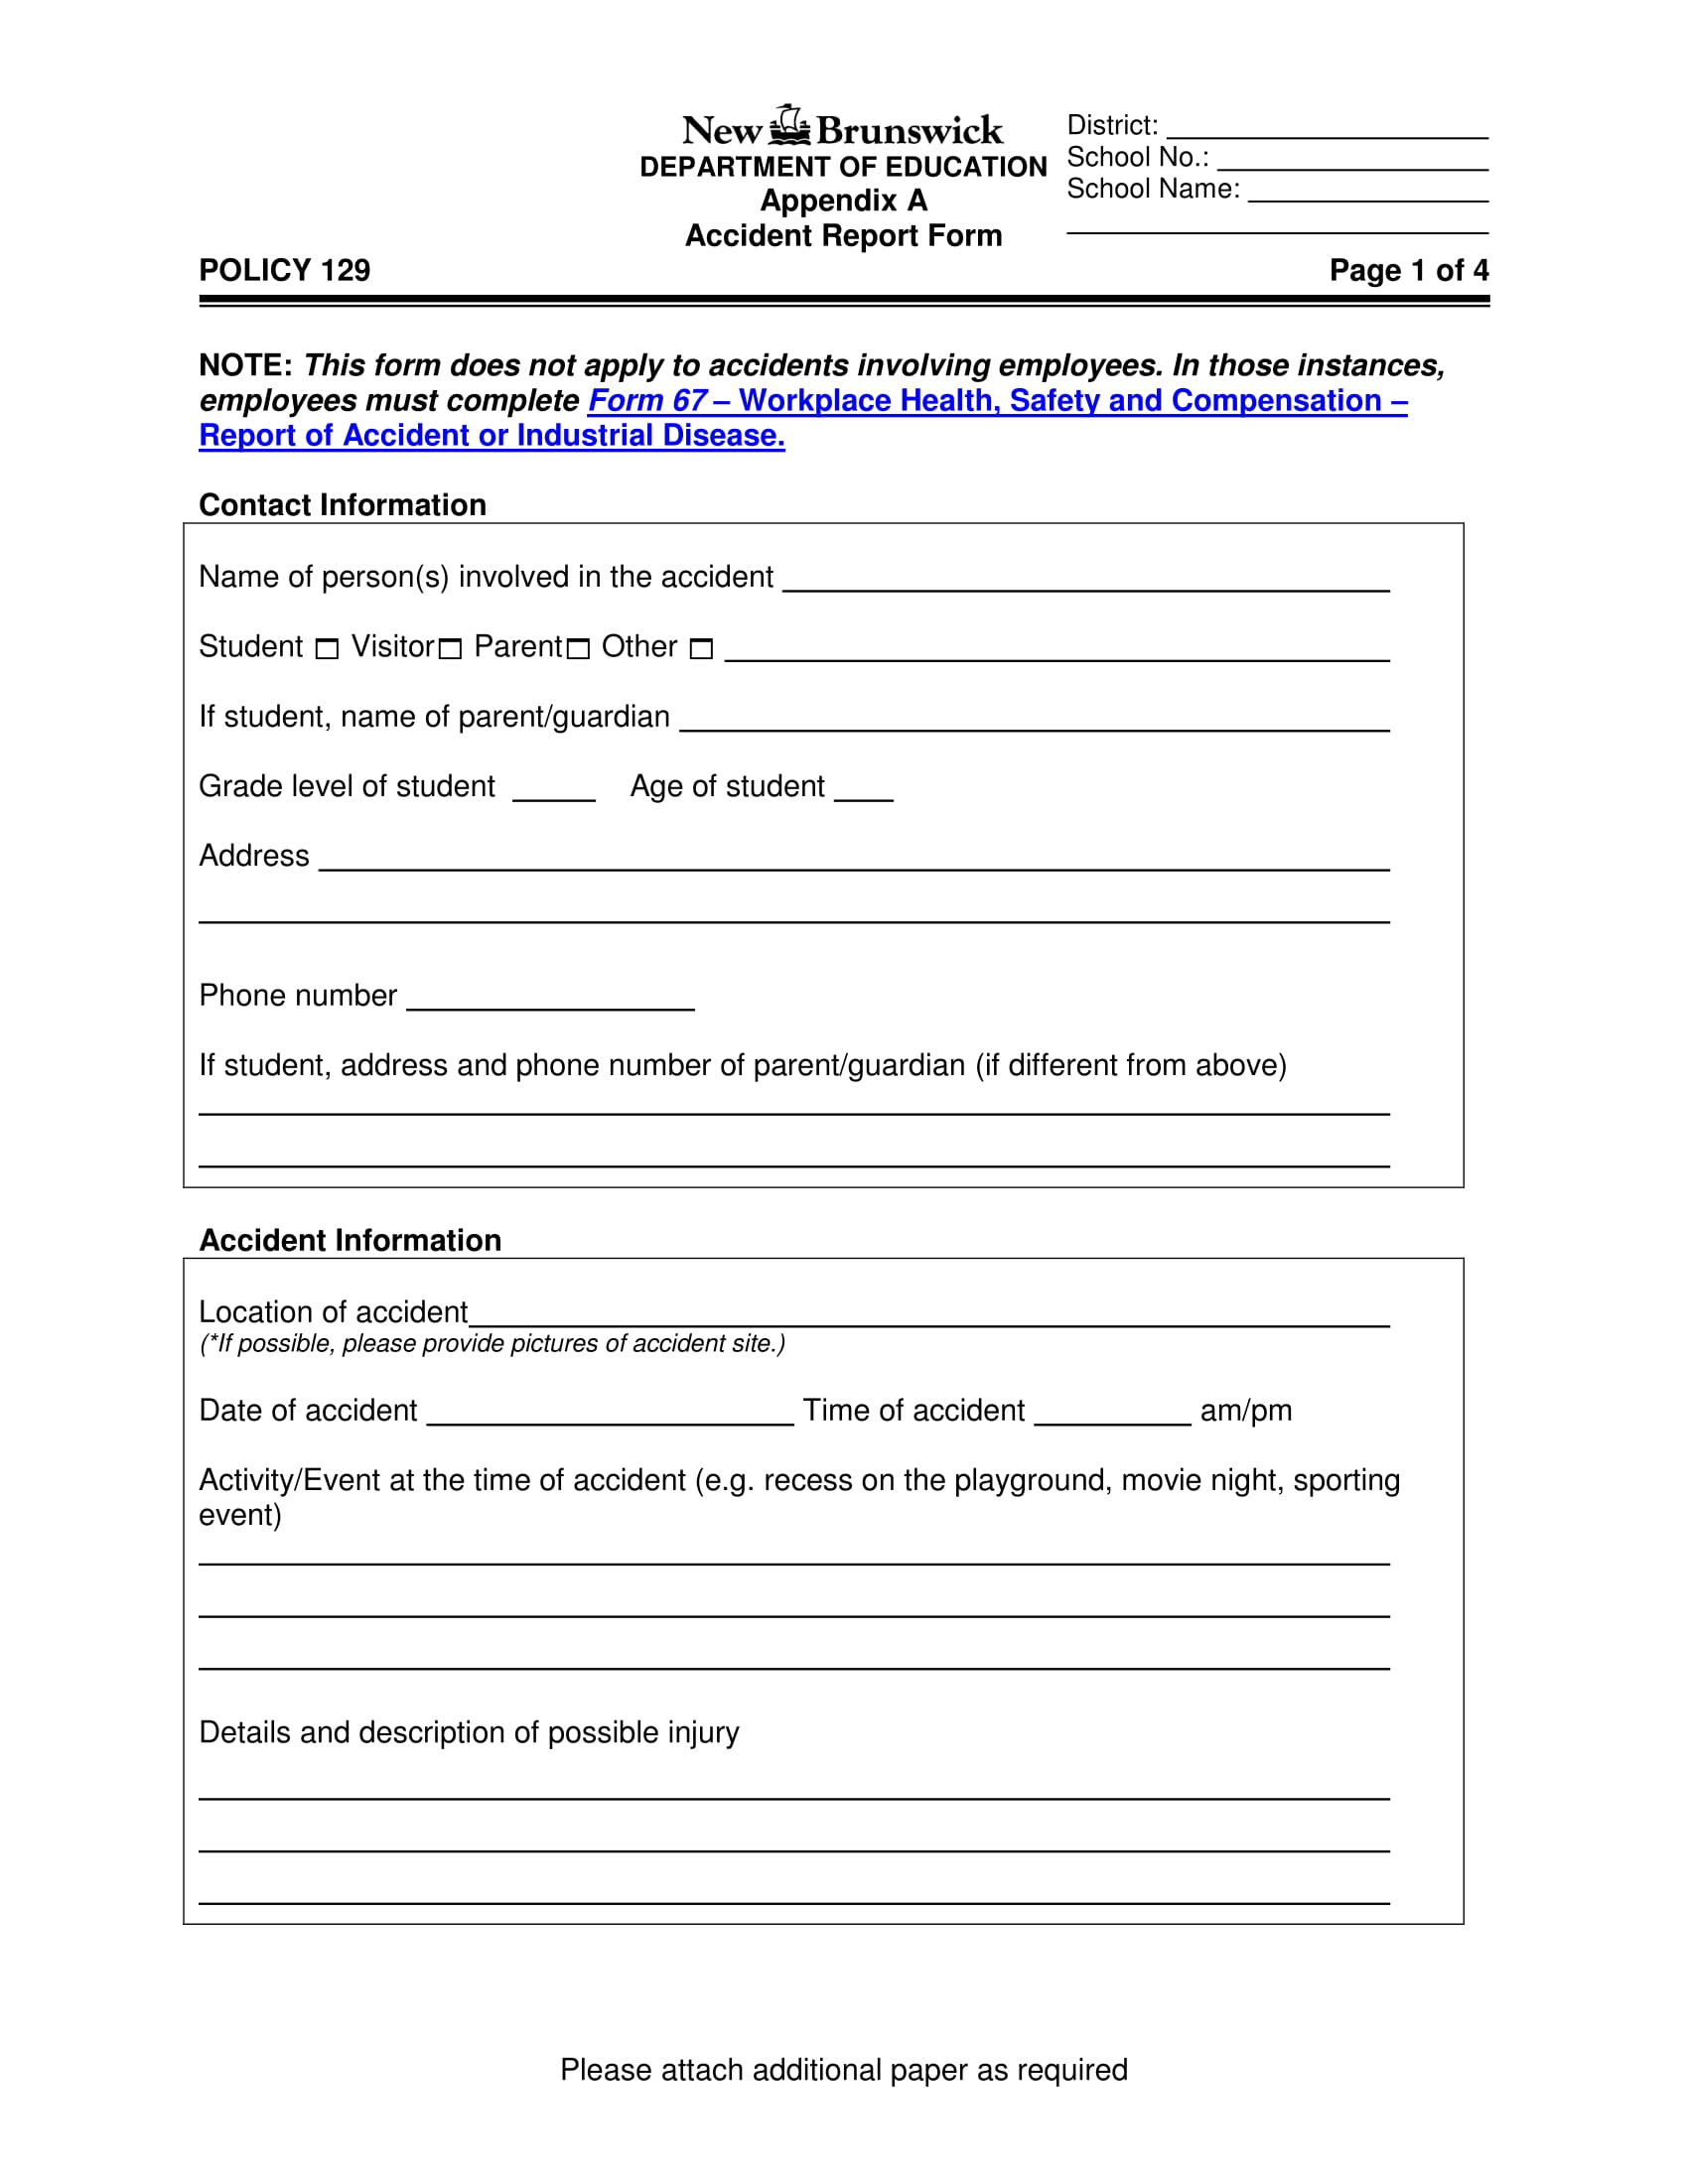 student accident report information form 11